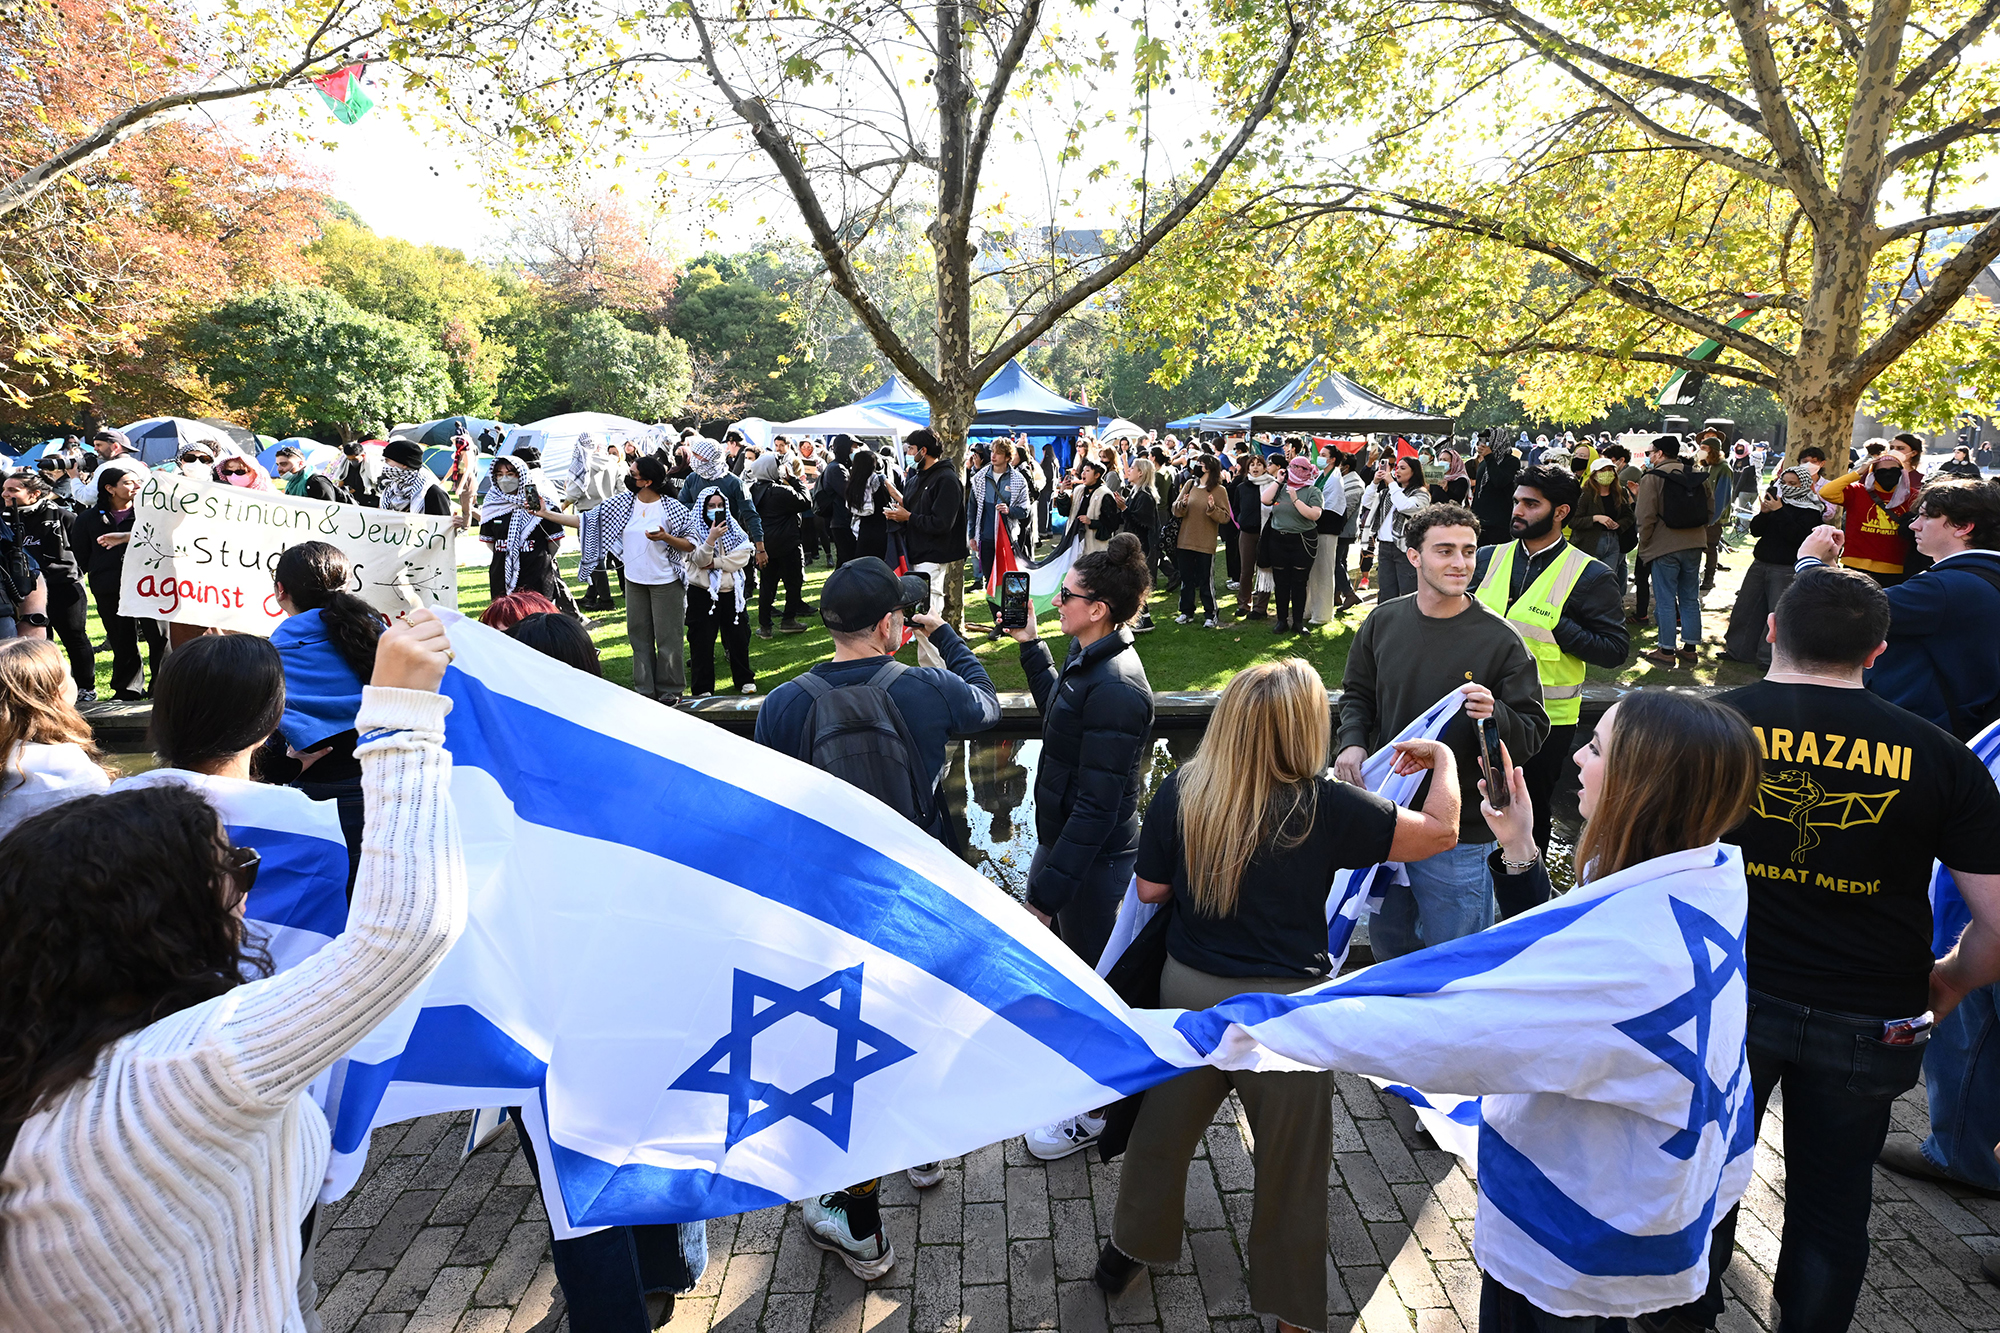 Members of the Jewish community gather opposite a pro-Palestine encampment at the University of Melbourne, in Melbourne, Australia, on May 2.